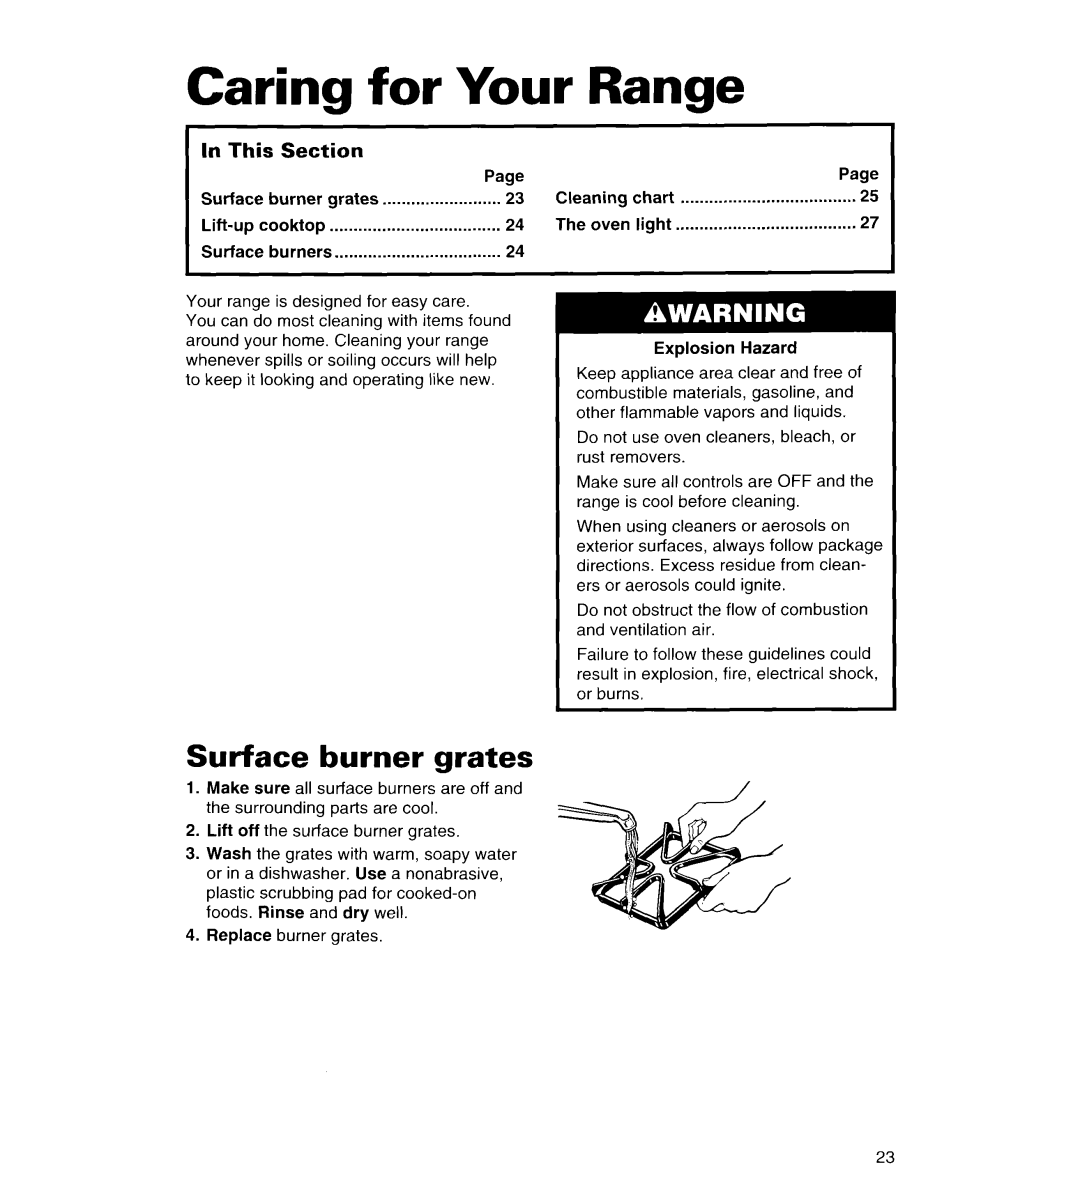 Whirlpool FGS385B important safety instructions Caring for Your Range, Surface burner grates 